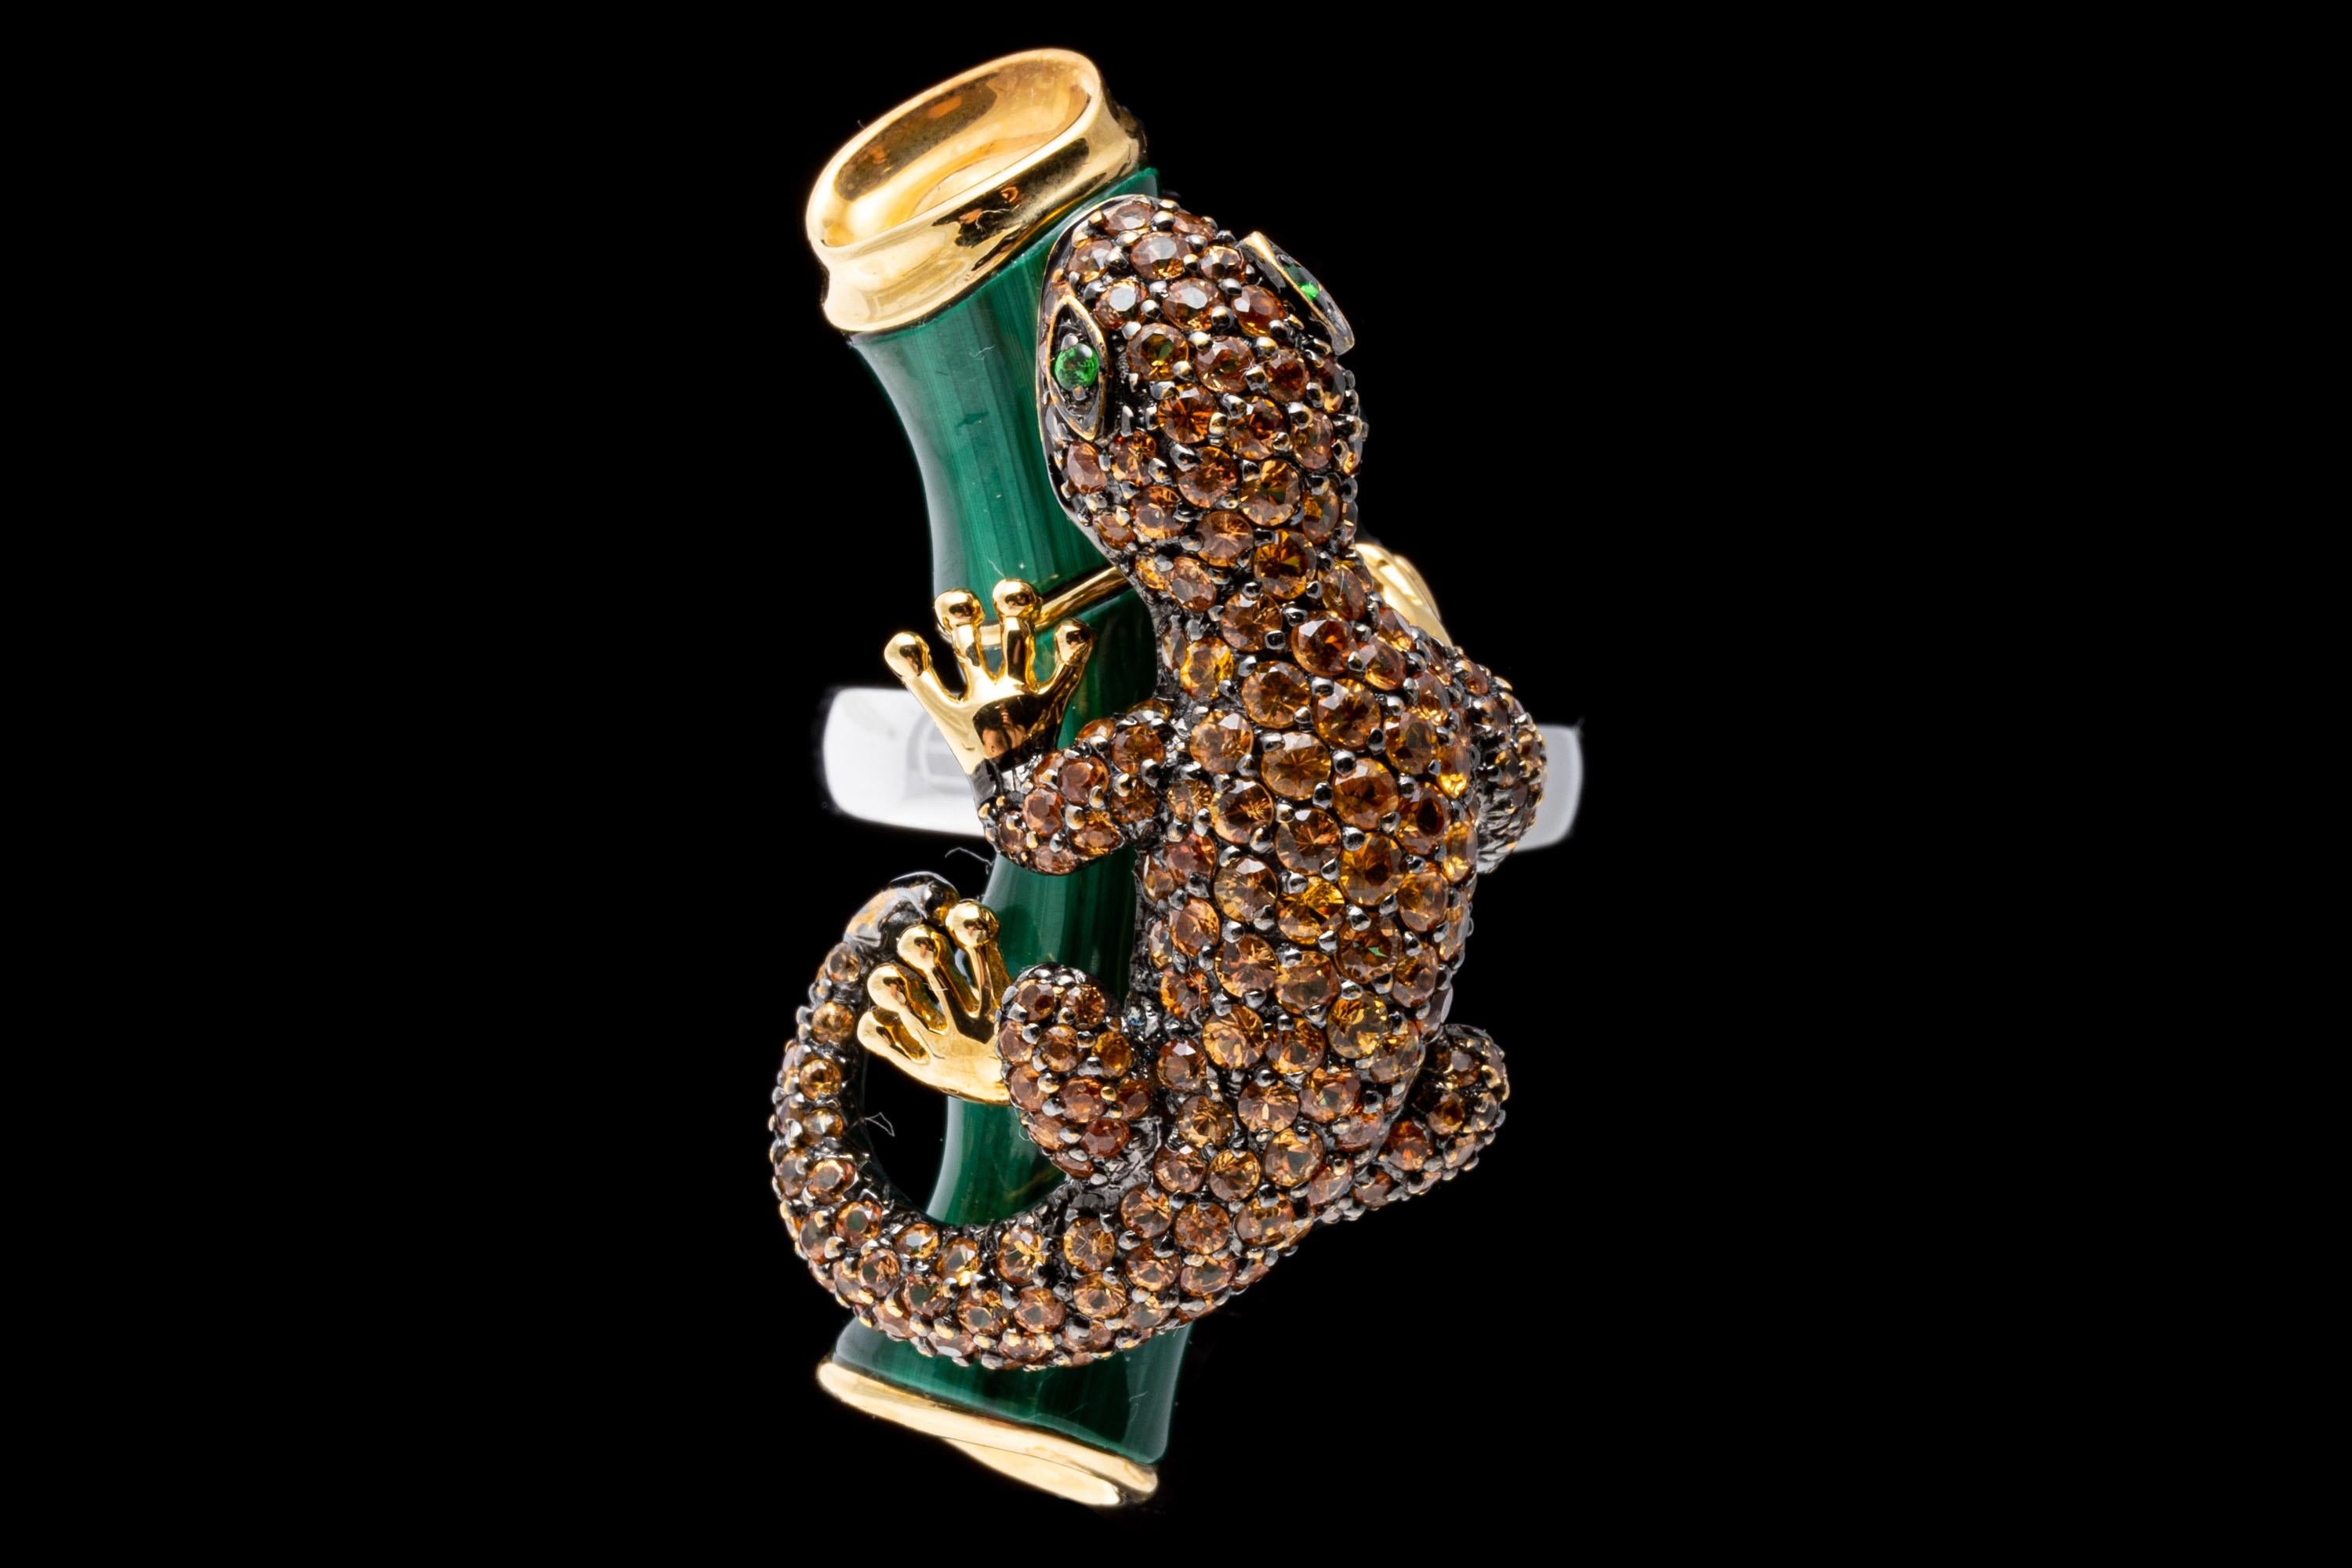 18k Gold Pave Topaz Salamander Ring/Pendant With Malachite For Sale 7